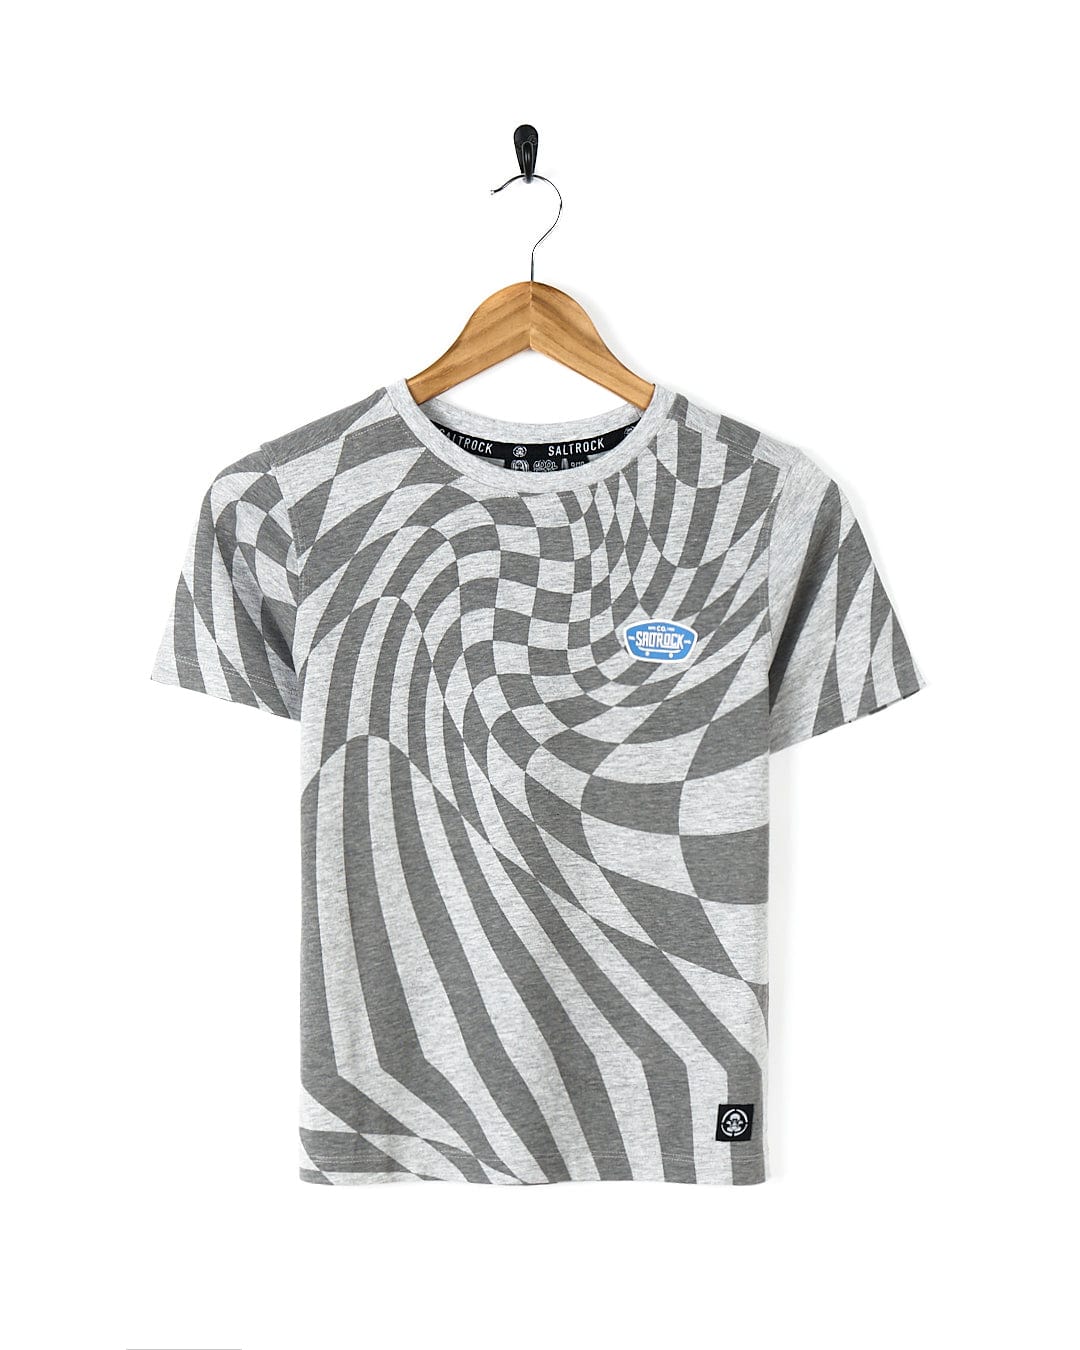 A Hardskate Warp - Kids Short Sleeve T-Shirt - Grey with a geometric all-over print in grey and white.